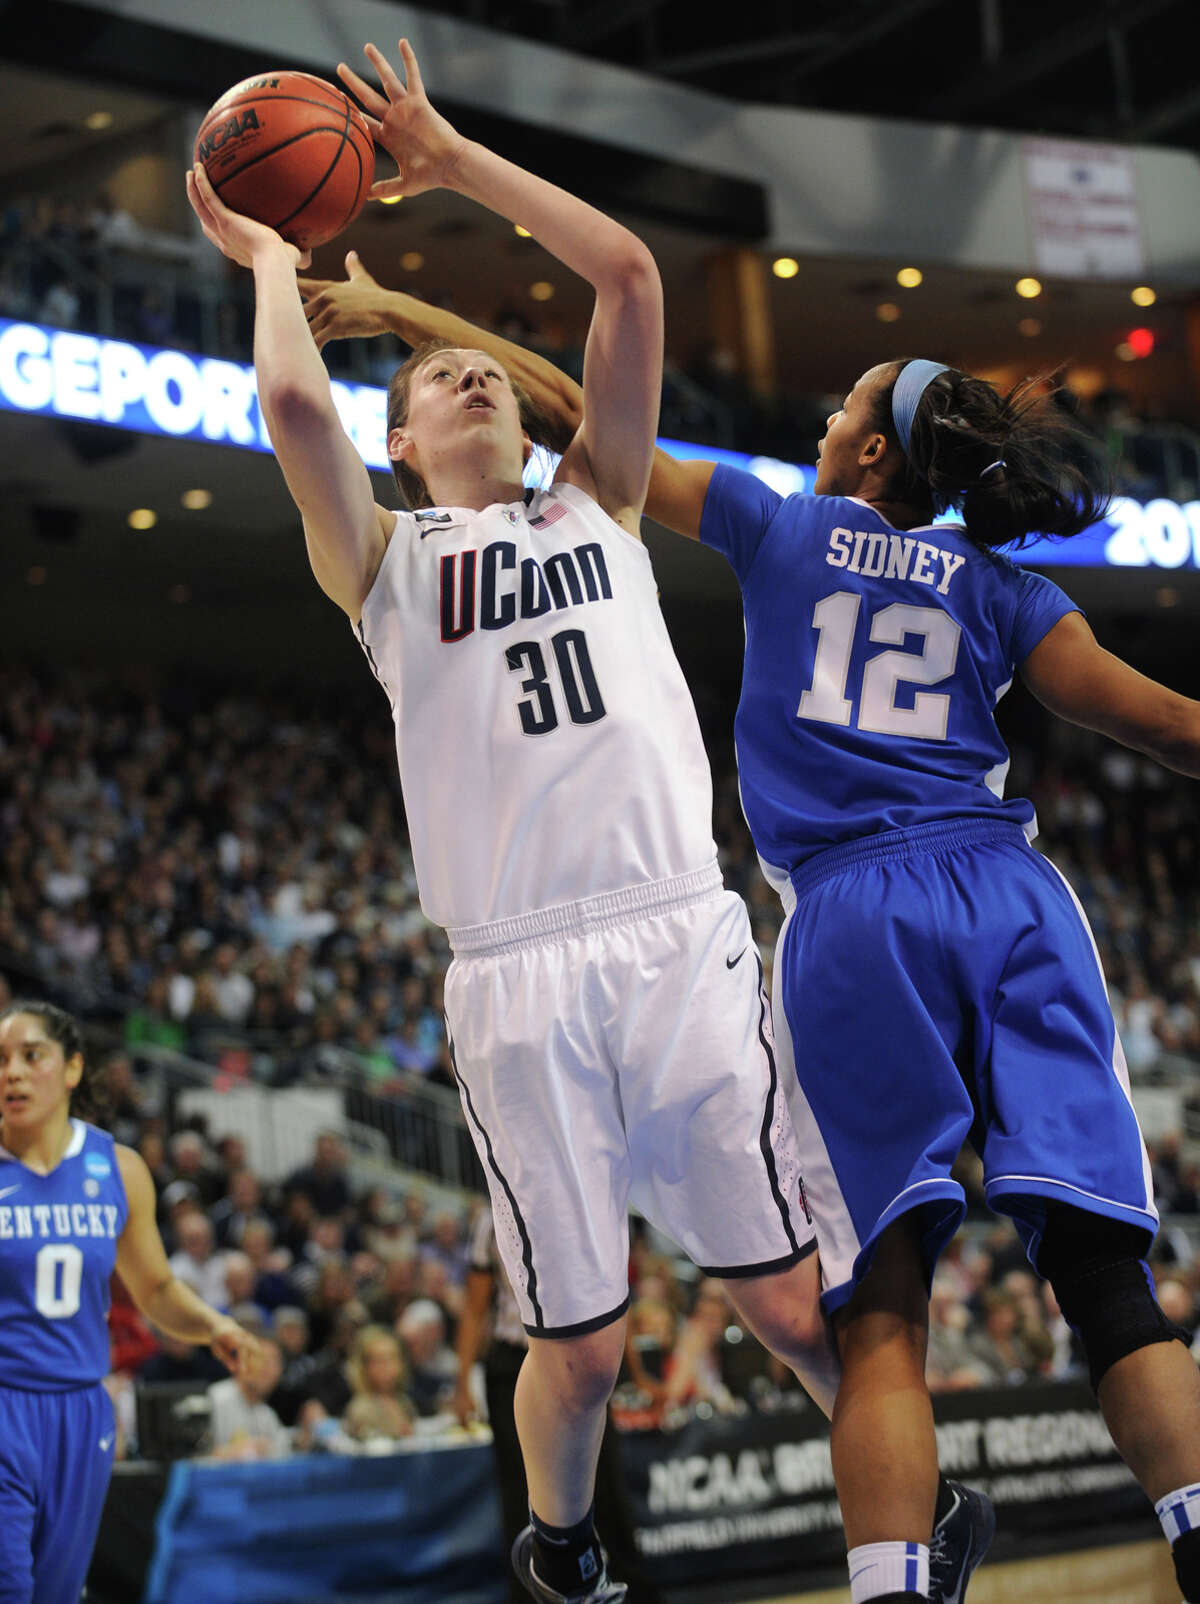 UConn's Breanna Stewart drives to the basket during their 83-53 victory over Kentucky in the elite eight round of the NCAA Women's Basketball Tournament at the Webster Bank Arena in Bridgeport, Conn. on Monday, April 1, 2013.